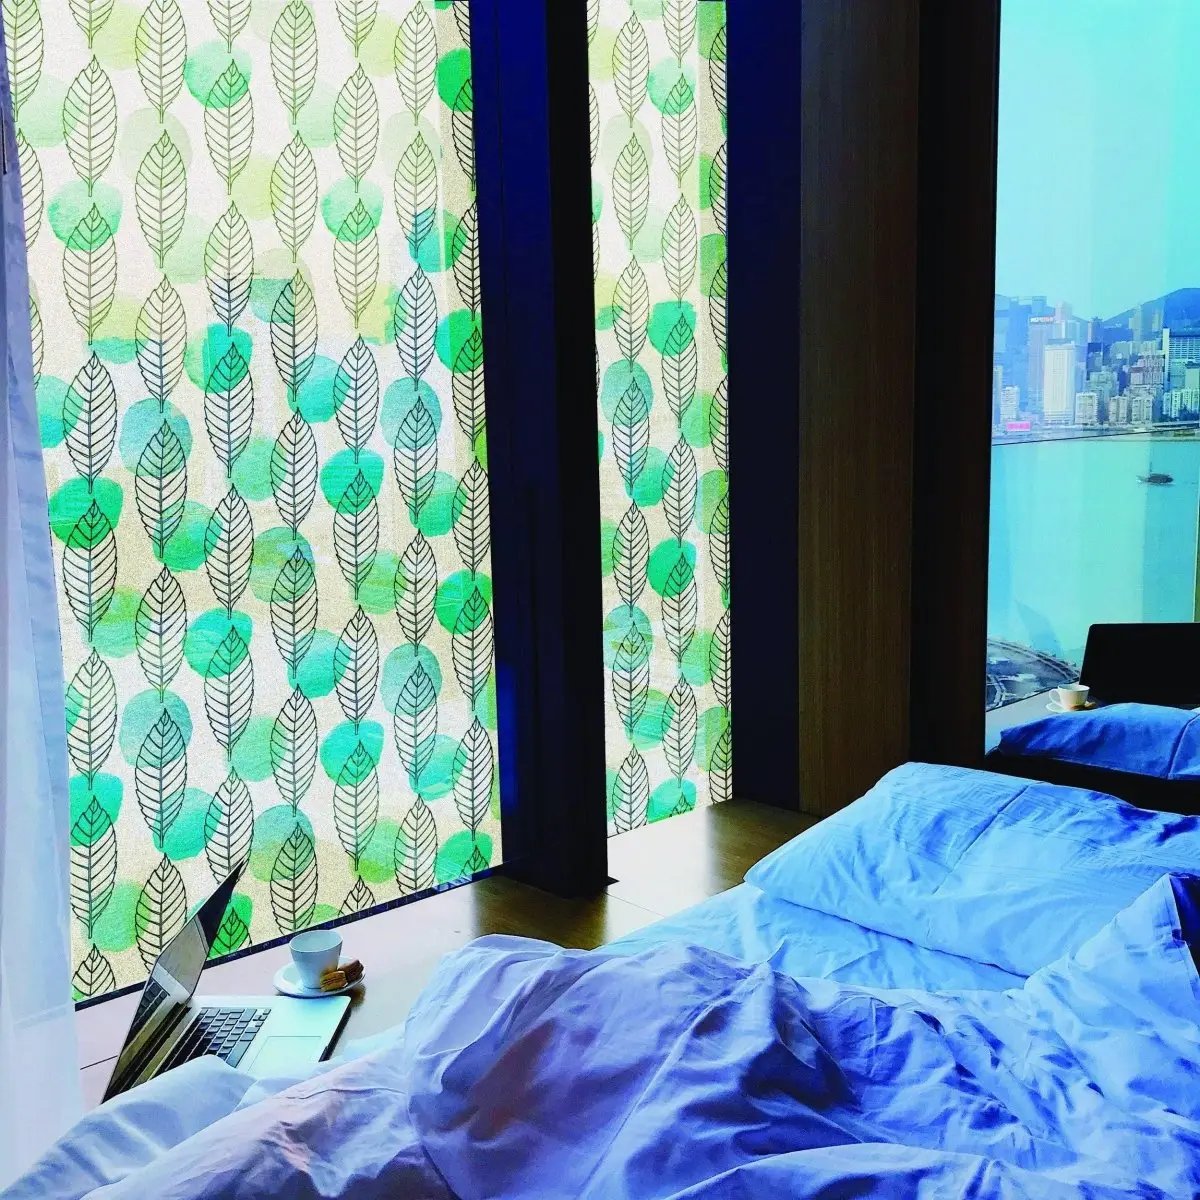 Elegant Leaf Etched Glass Film: Enhance Privacy and Style - Decords